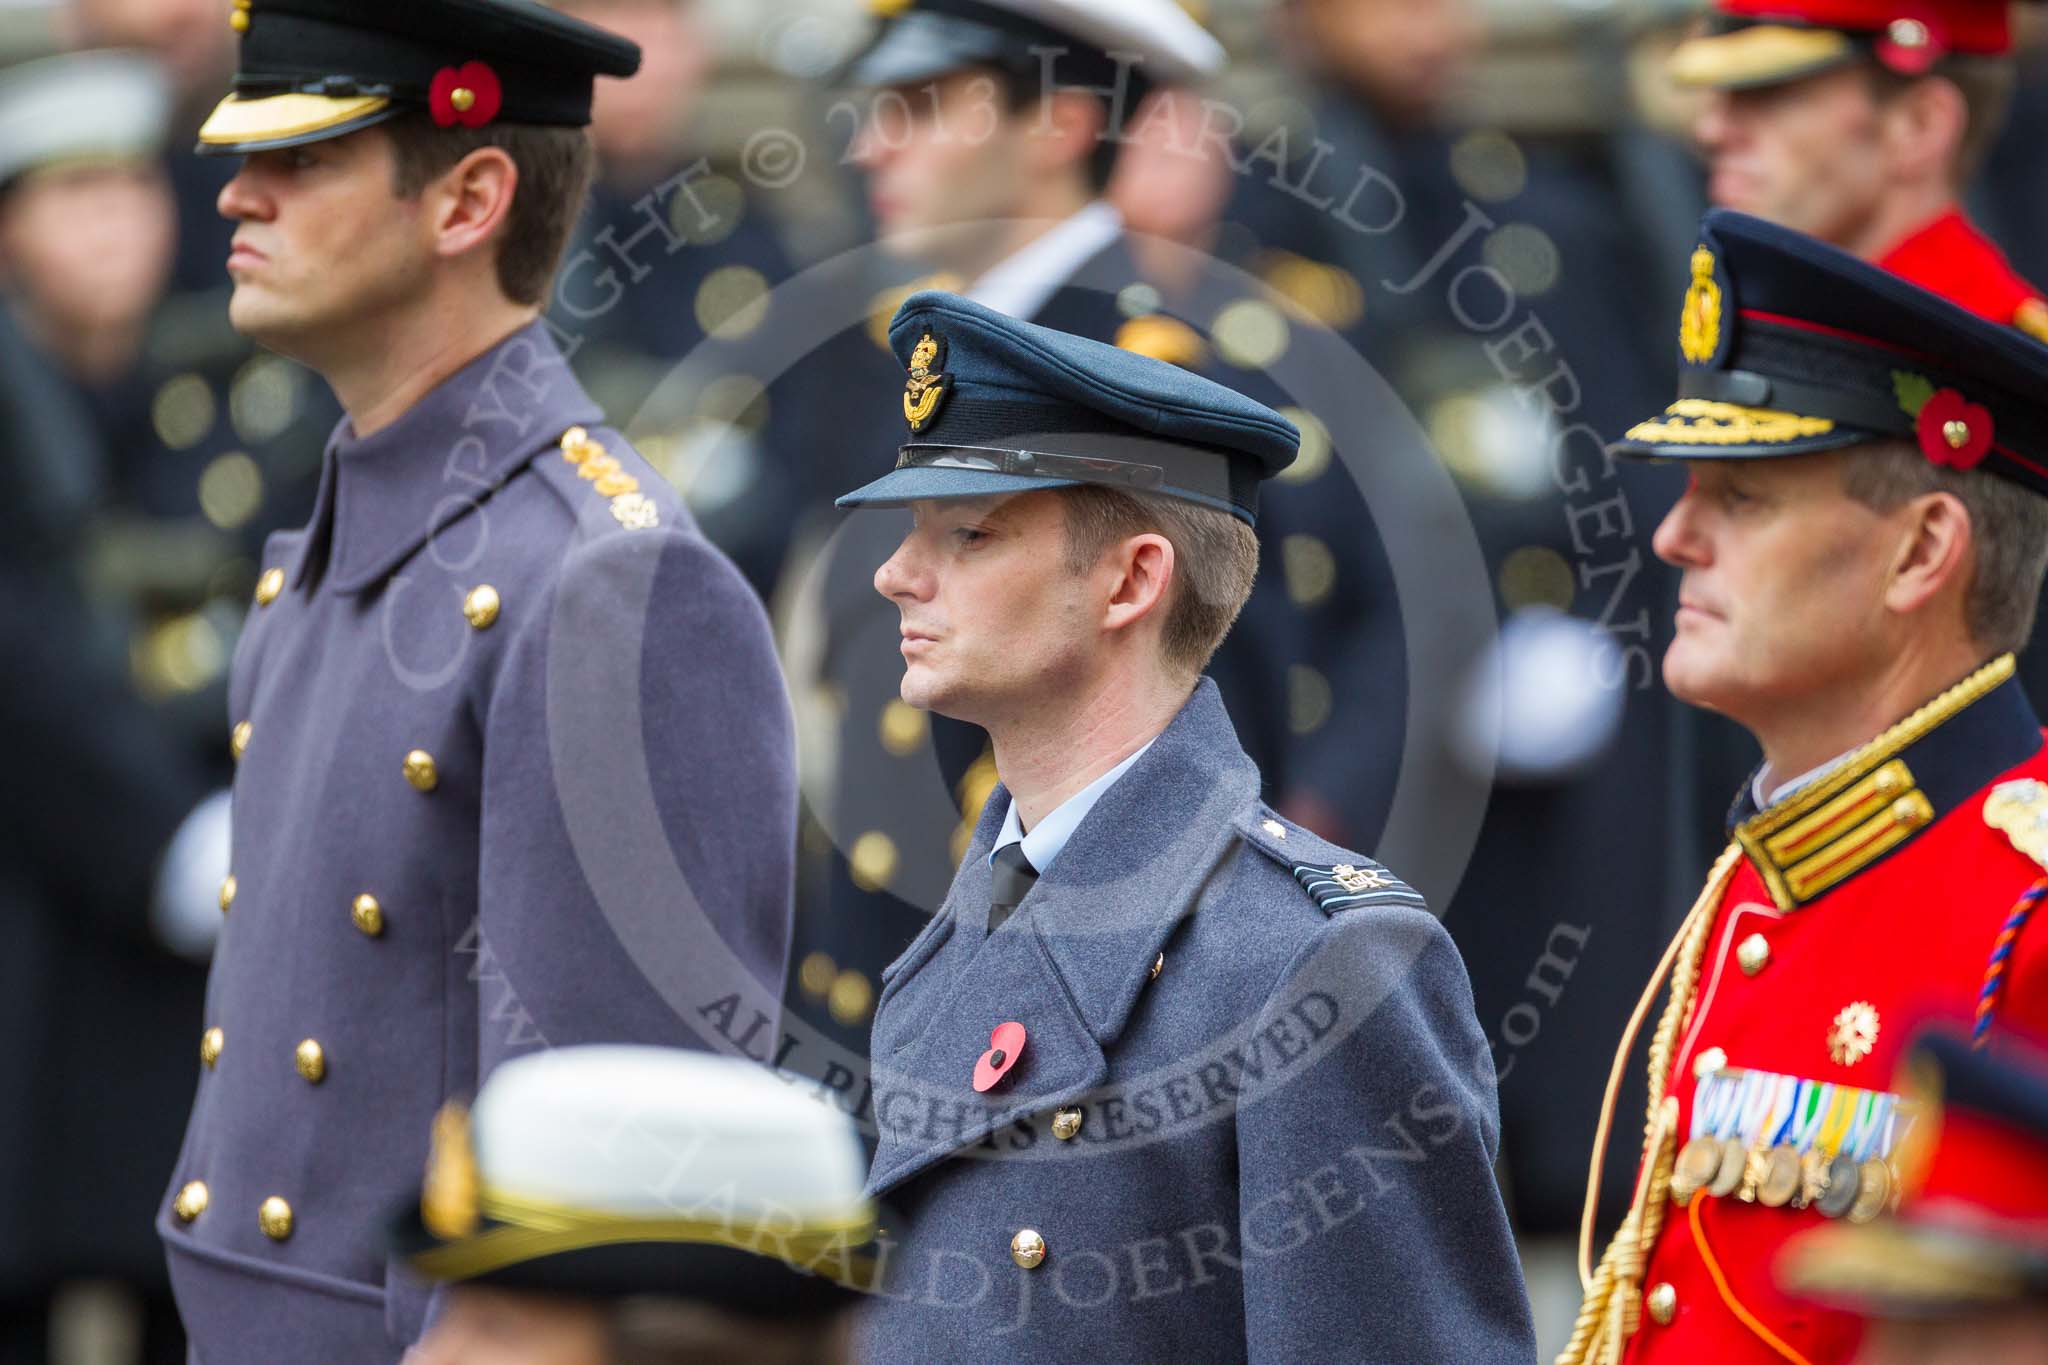 Remembrance Sunday at the Cenotaph 2015: Wing Commander Sam Fletcher, RAF, Equerry to The Queen. Image #264, 08 November 2015 11:12 Whitehall, London, UK